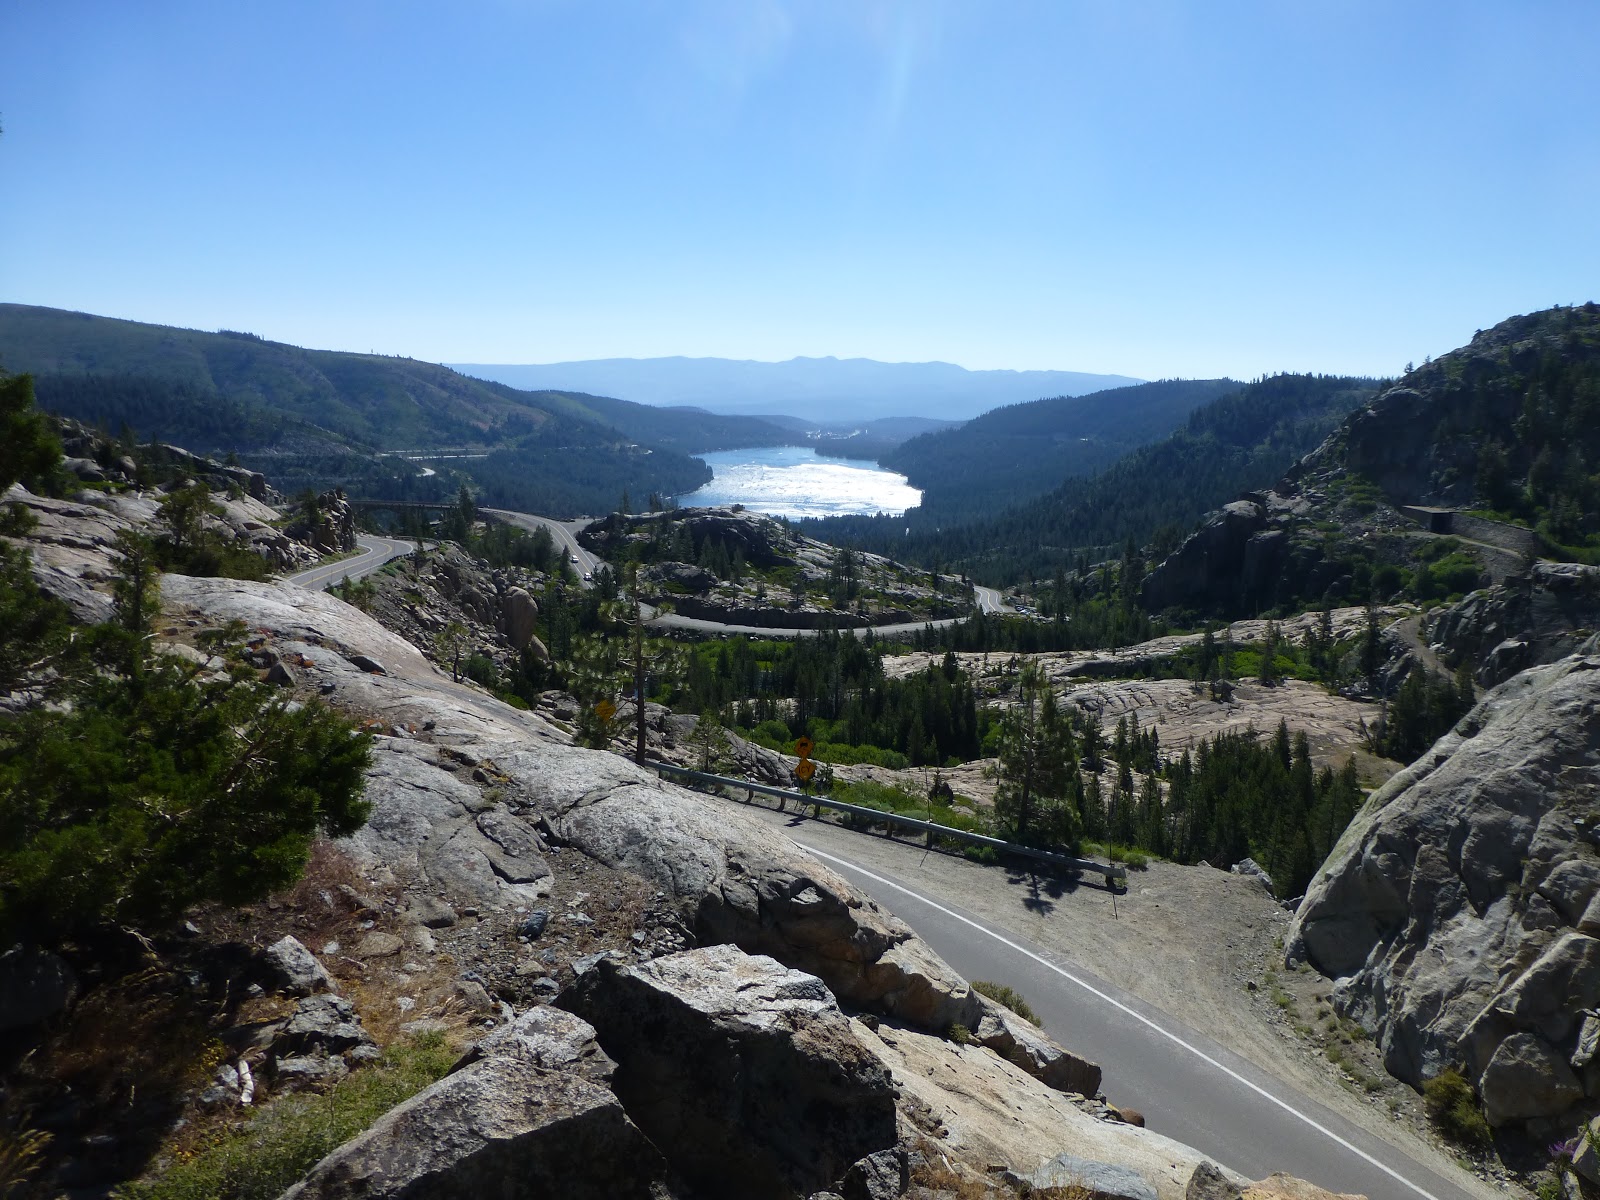 View from Donner Pass towards Donner Lake